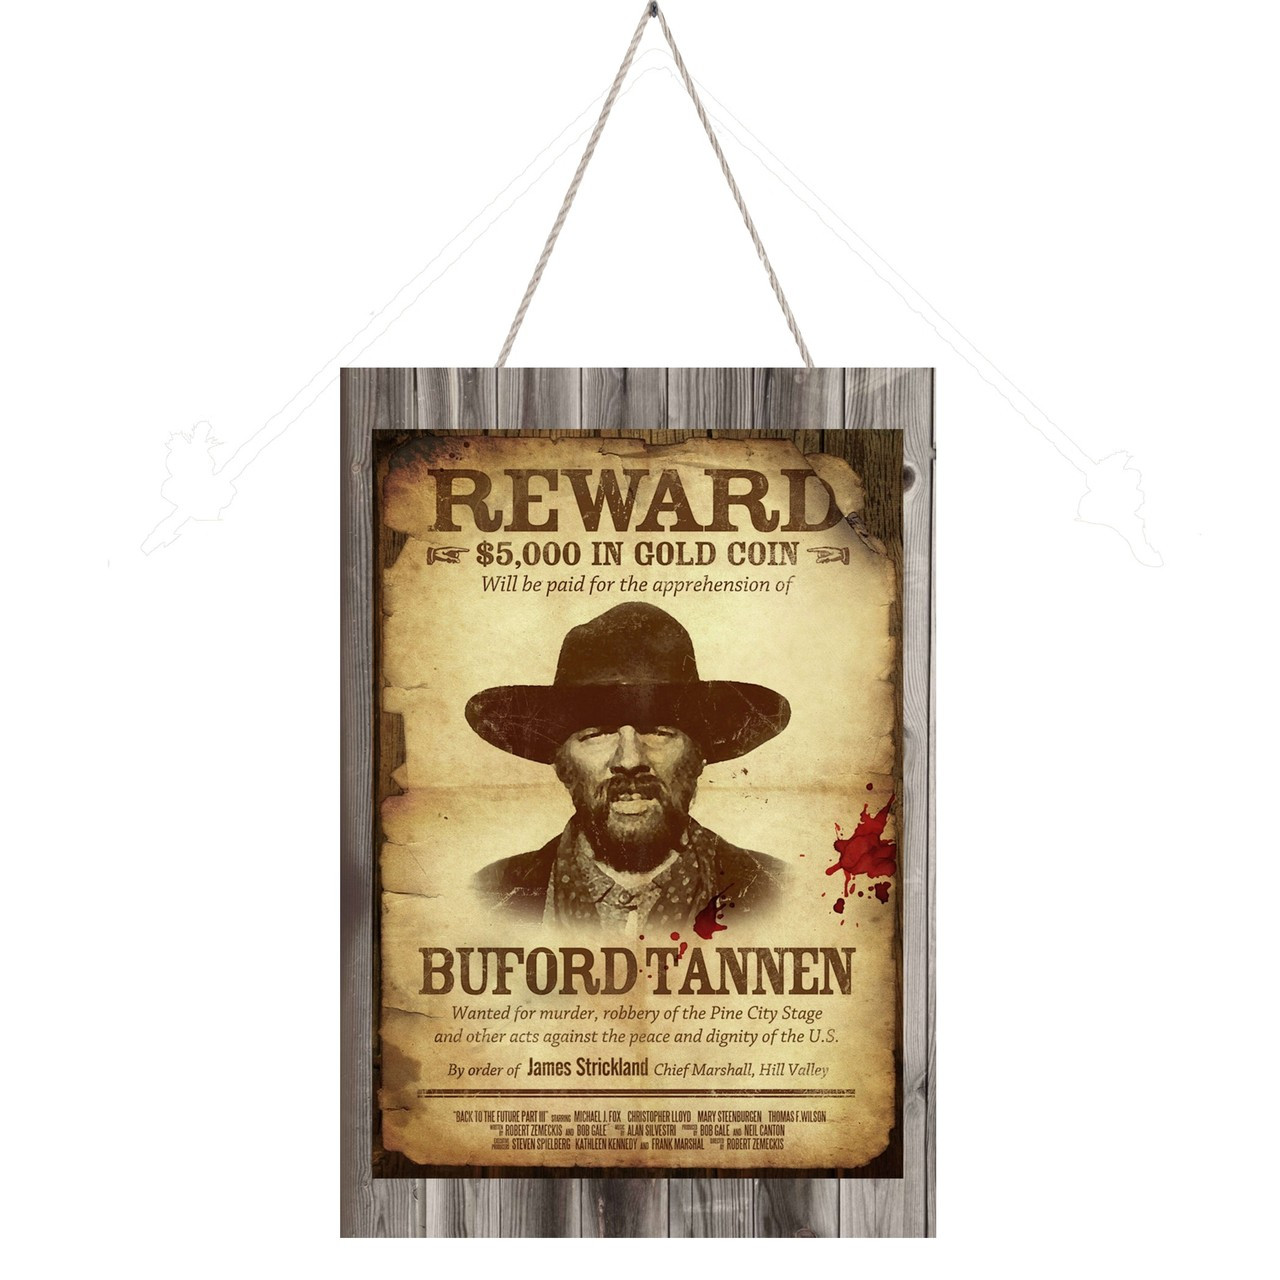 Wanted Dead Or Alive Buford Tannen Back To The Future 12" X 18" wood sign